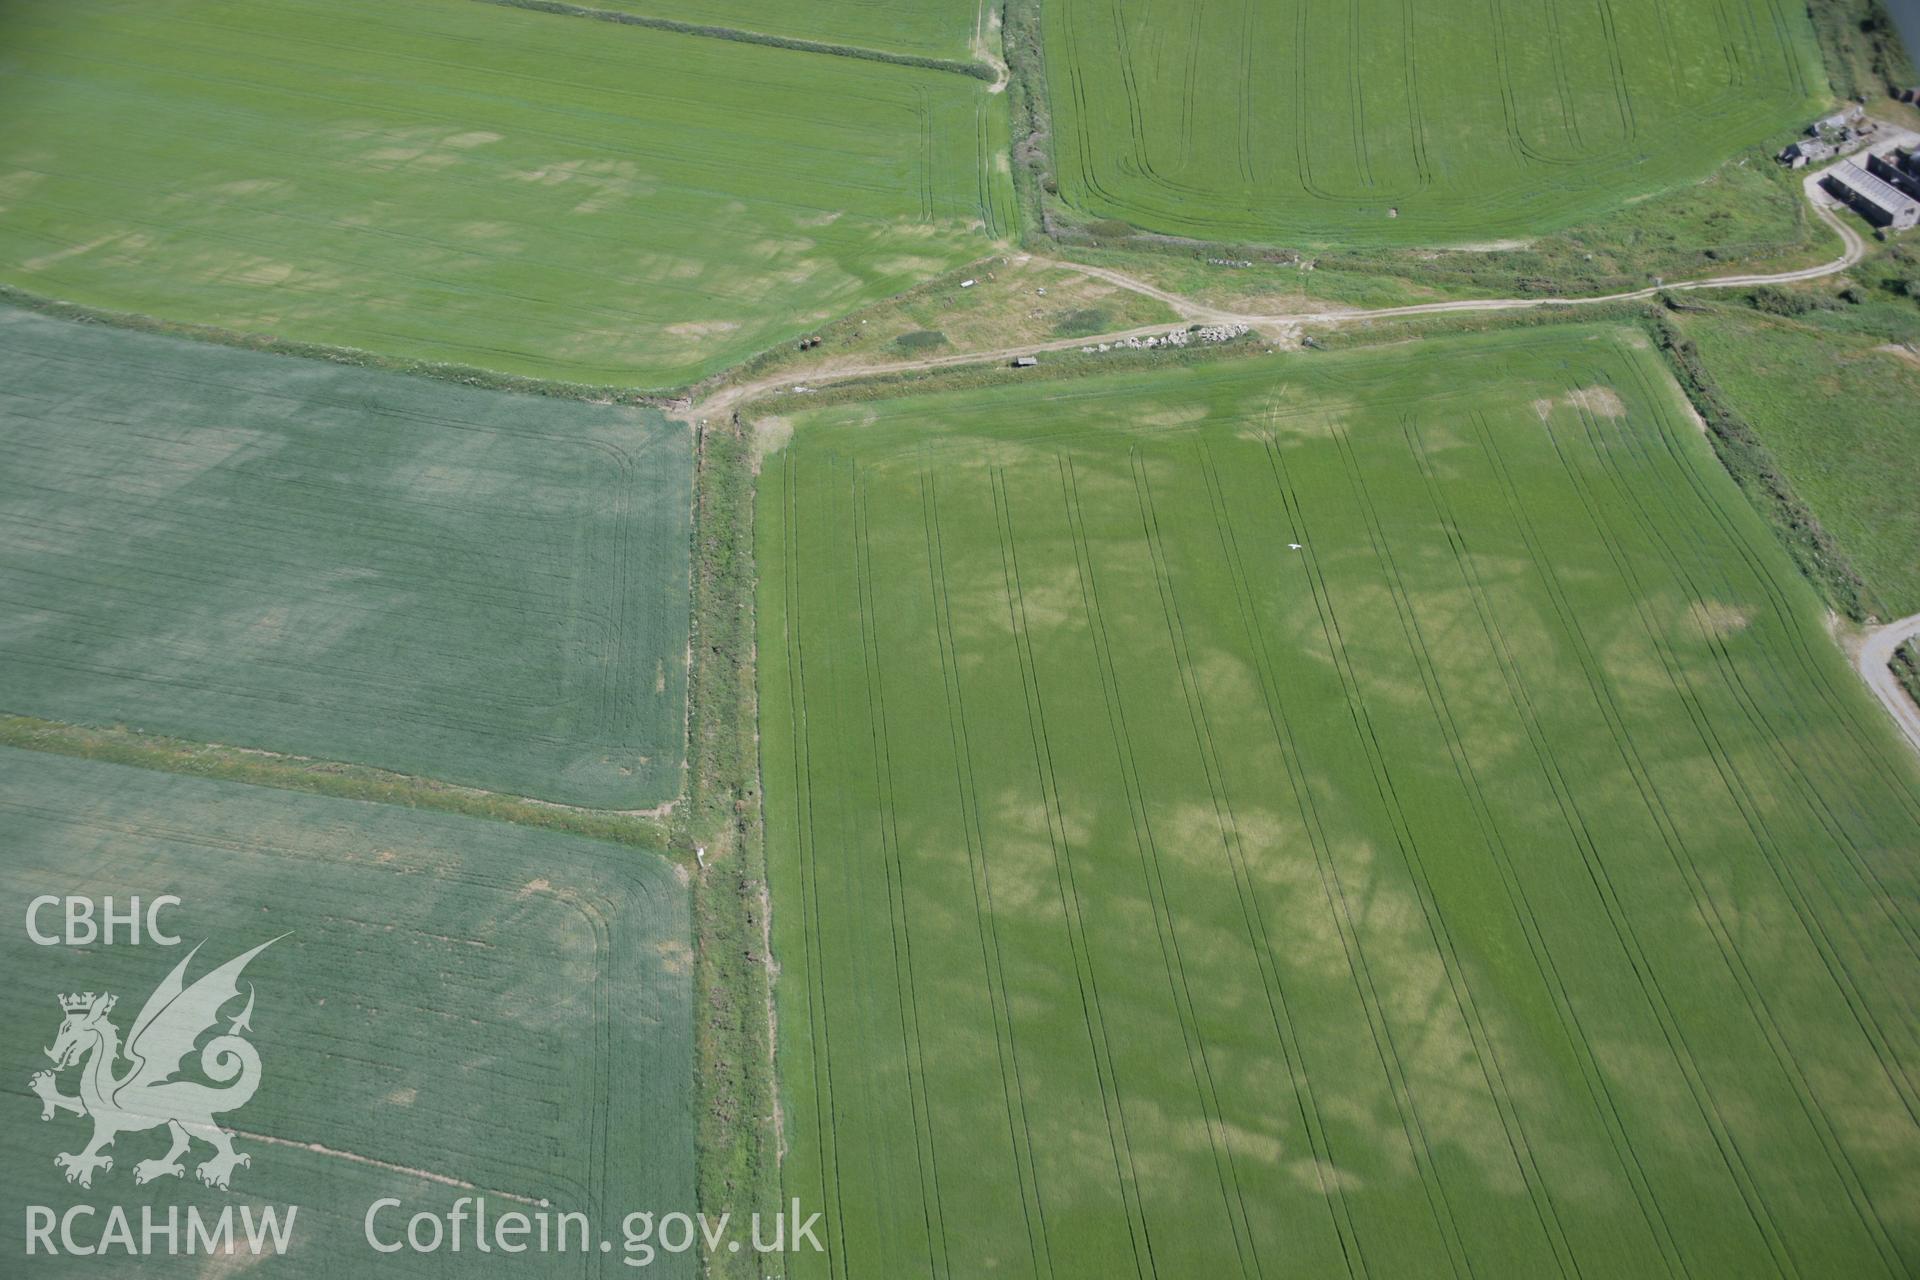 RCAHMW colour oblique aerial photograph of non - archaeological cropmarks, taken for record purposes,  Clyn-yr-ynys farm, viewed from the west. Taken on 23 June 2005 by Toby Driver